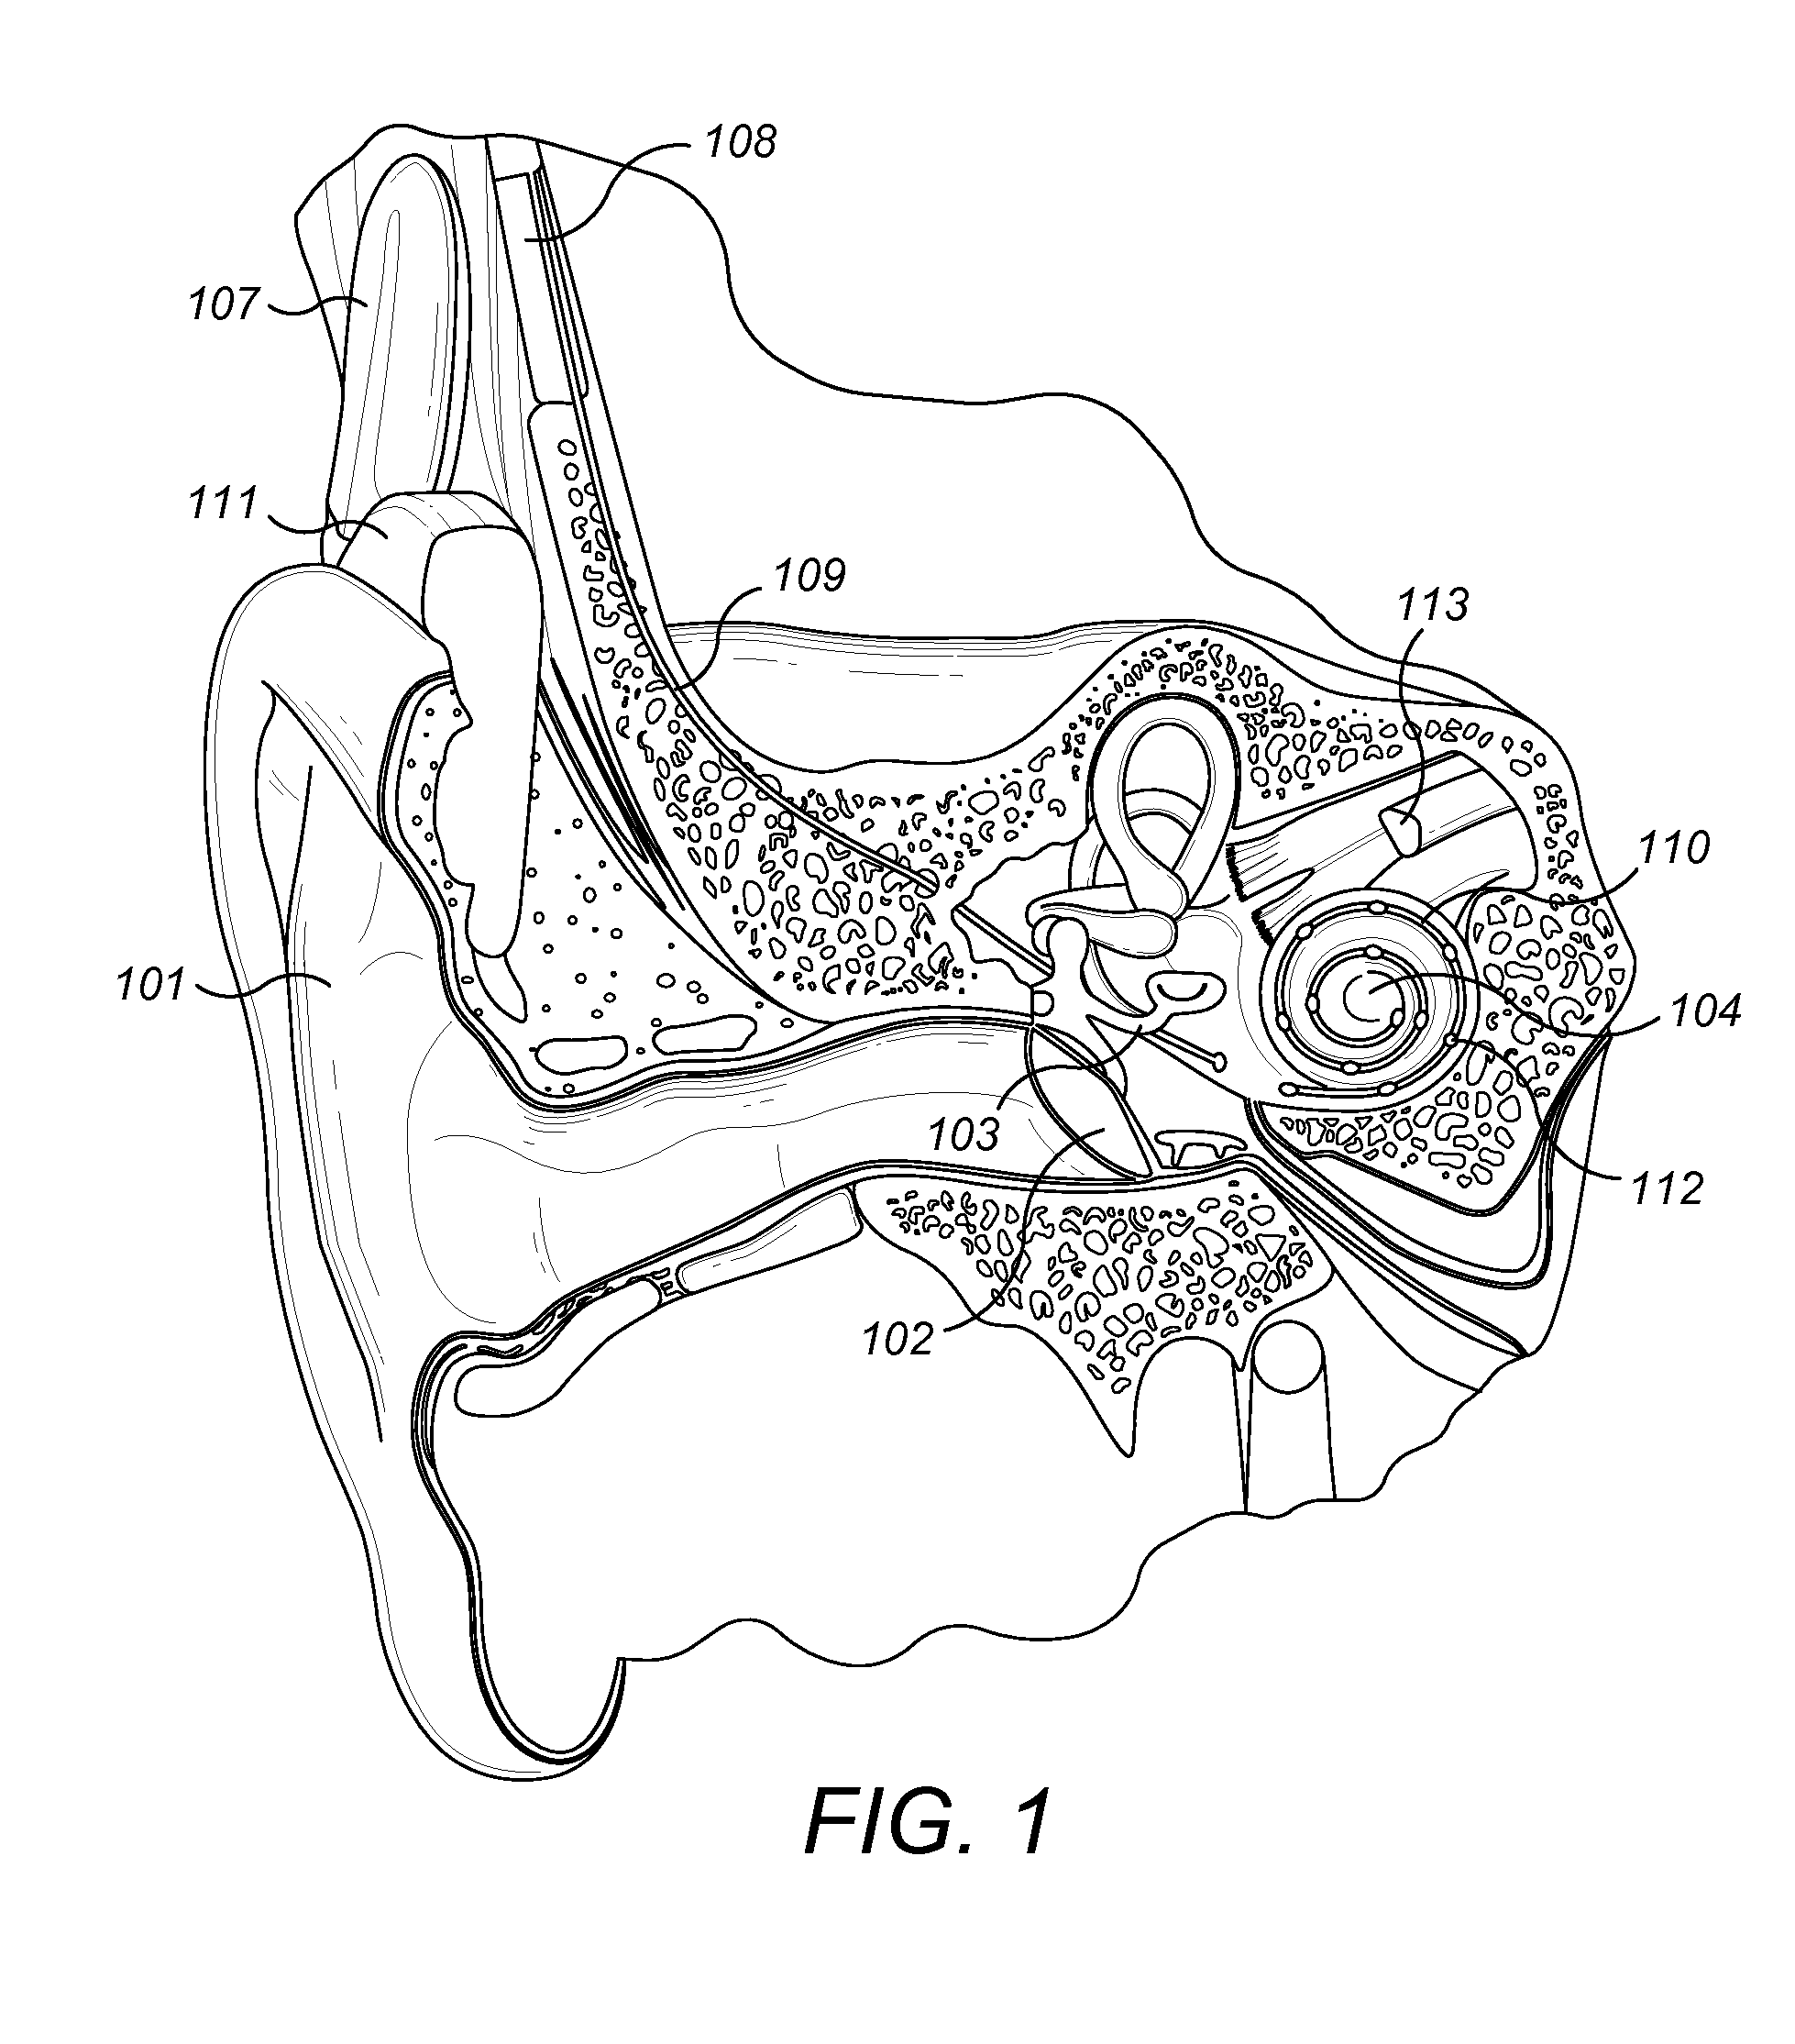 Cochlear Implant Electrode Insertion Support Device